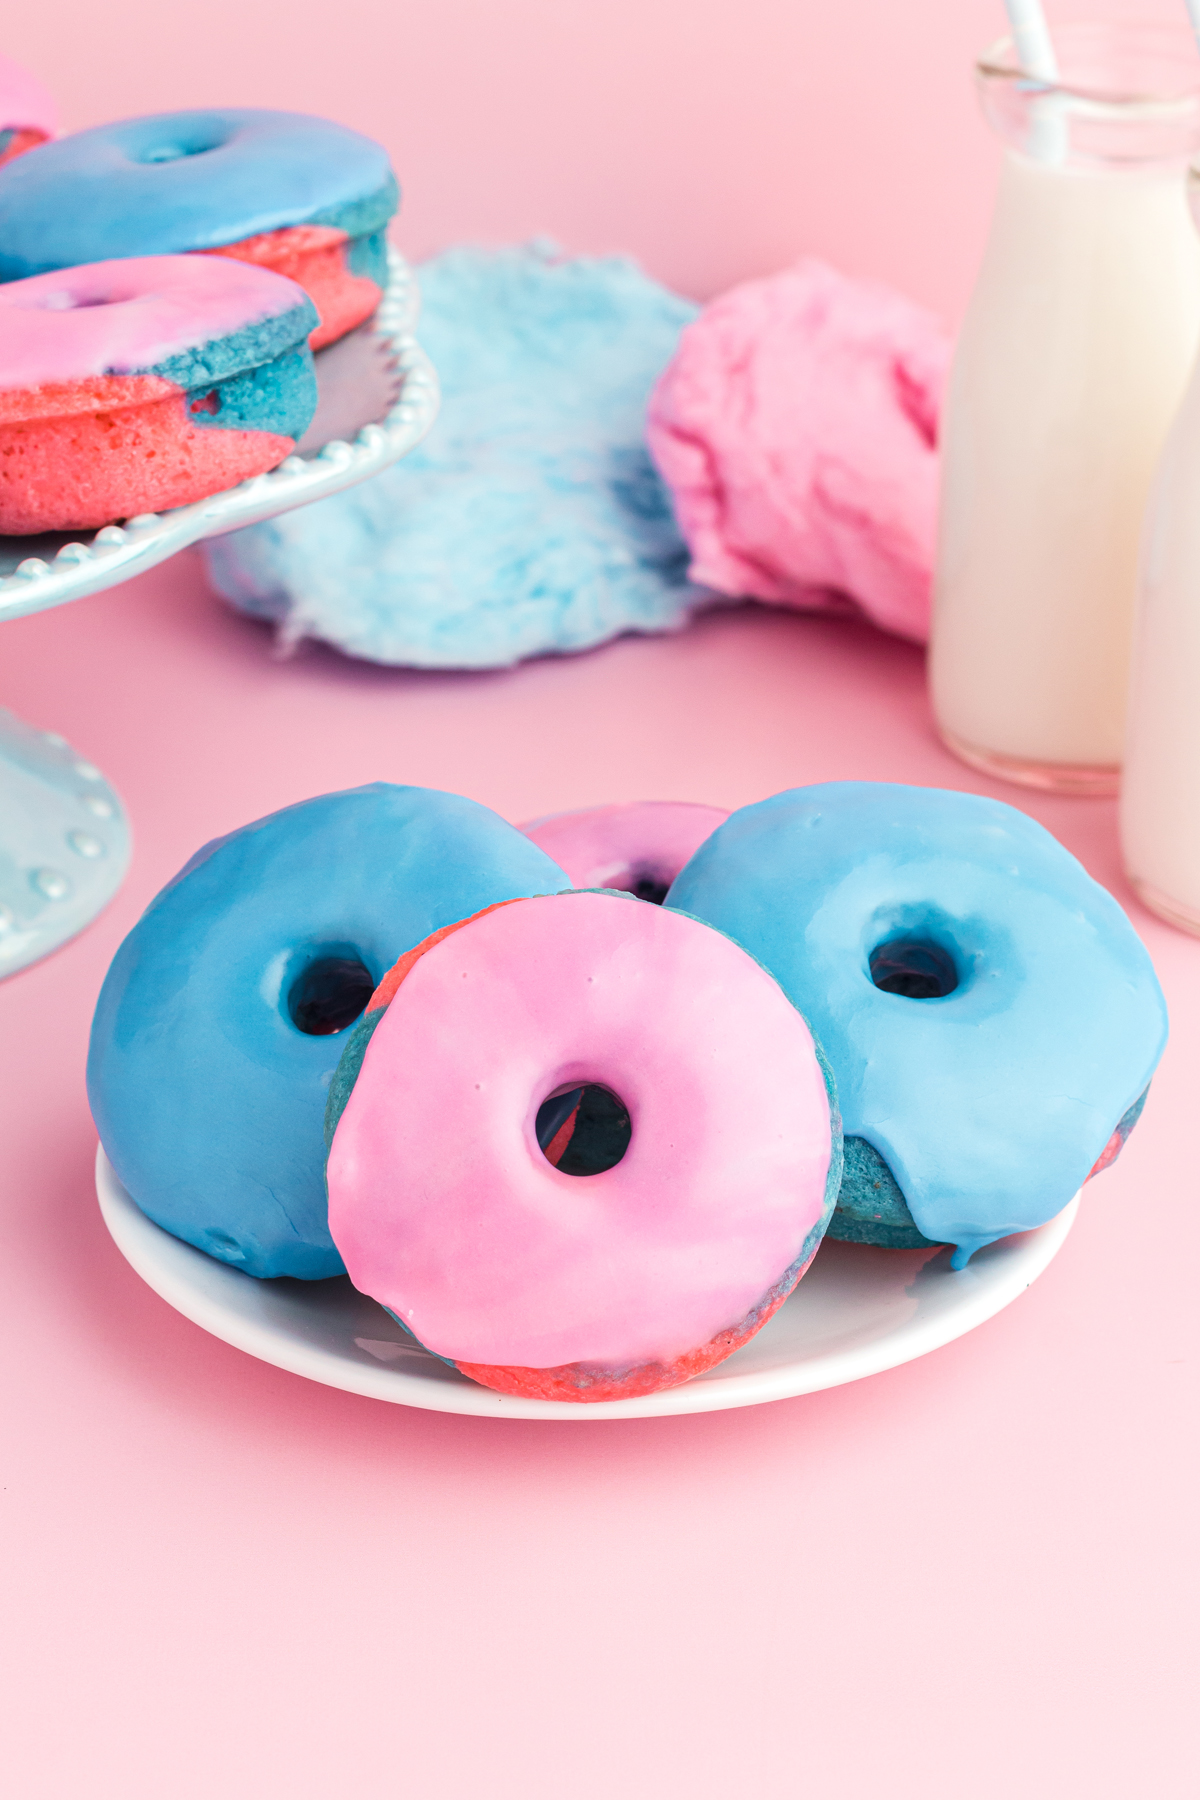 Baked Donuts Recipe - 2 blue and 1 pink (in center) donuts on a white plate. blue and pink cotton candy in the background middle, 2 milk jugs on the right, cake stand on the left showing a bit of donuts